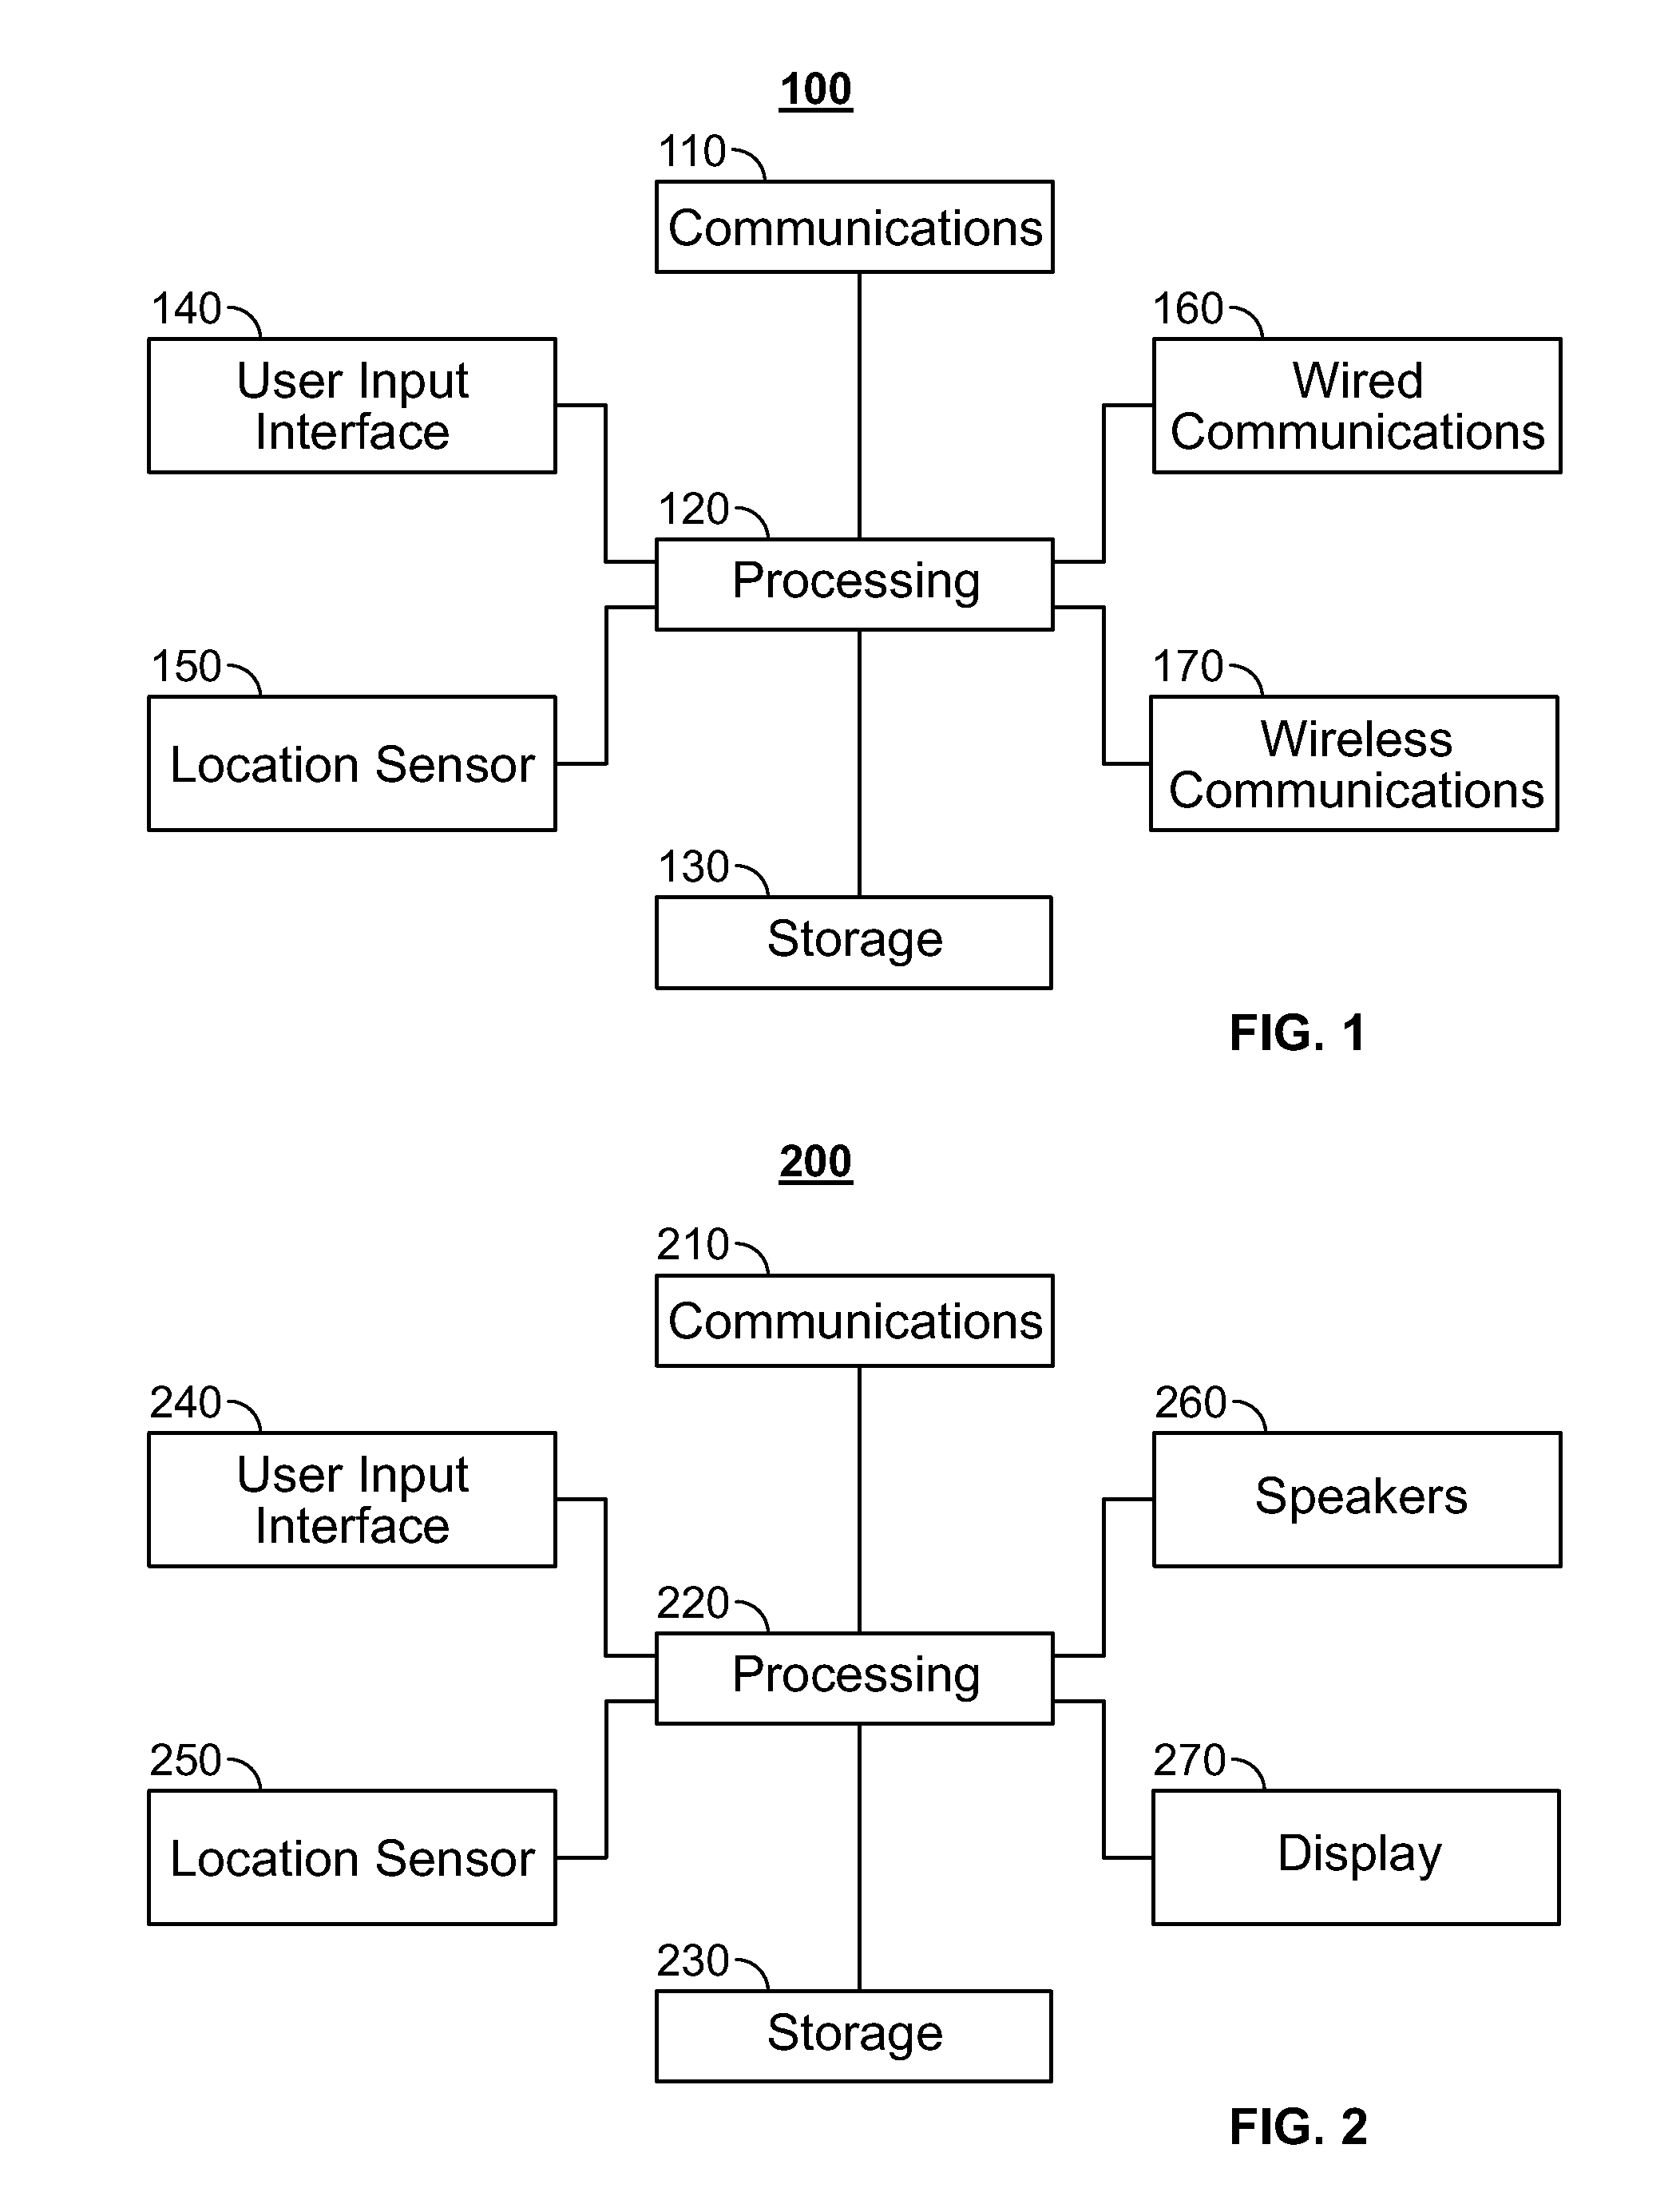 Systems and methods for executing a source handoff for media content presented on a user device from a network of set-top cells